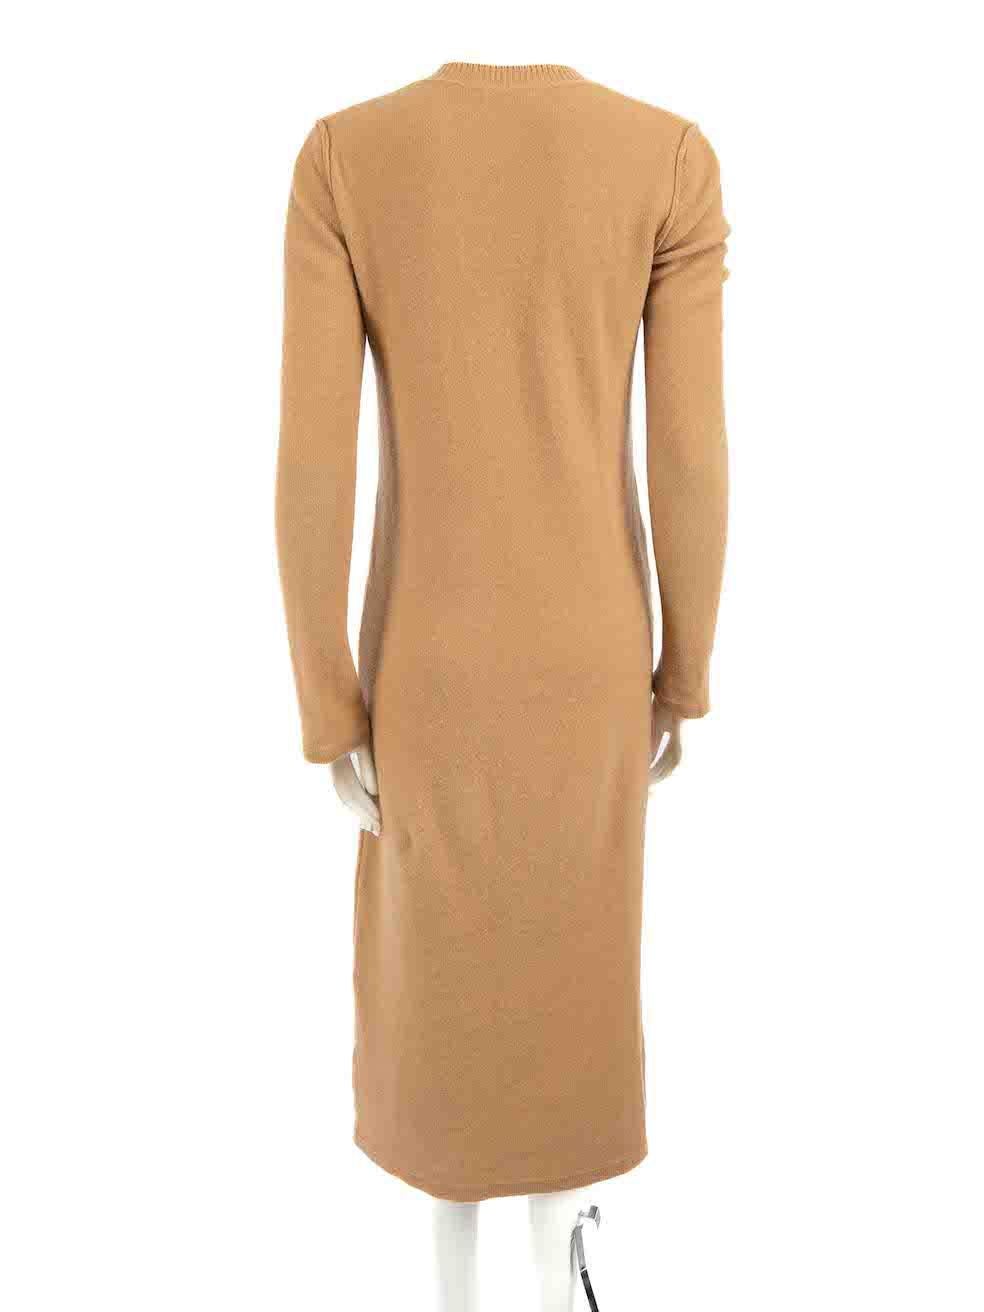 Chloé Camel Wool V-Neck Knitted Midi Dress Size M In Good Condition For Sale In London, GB